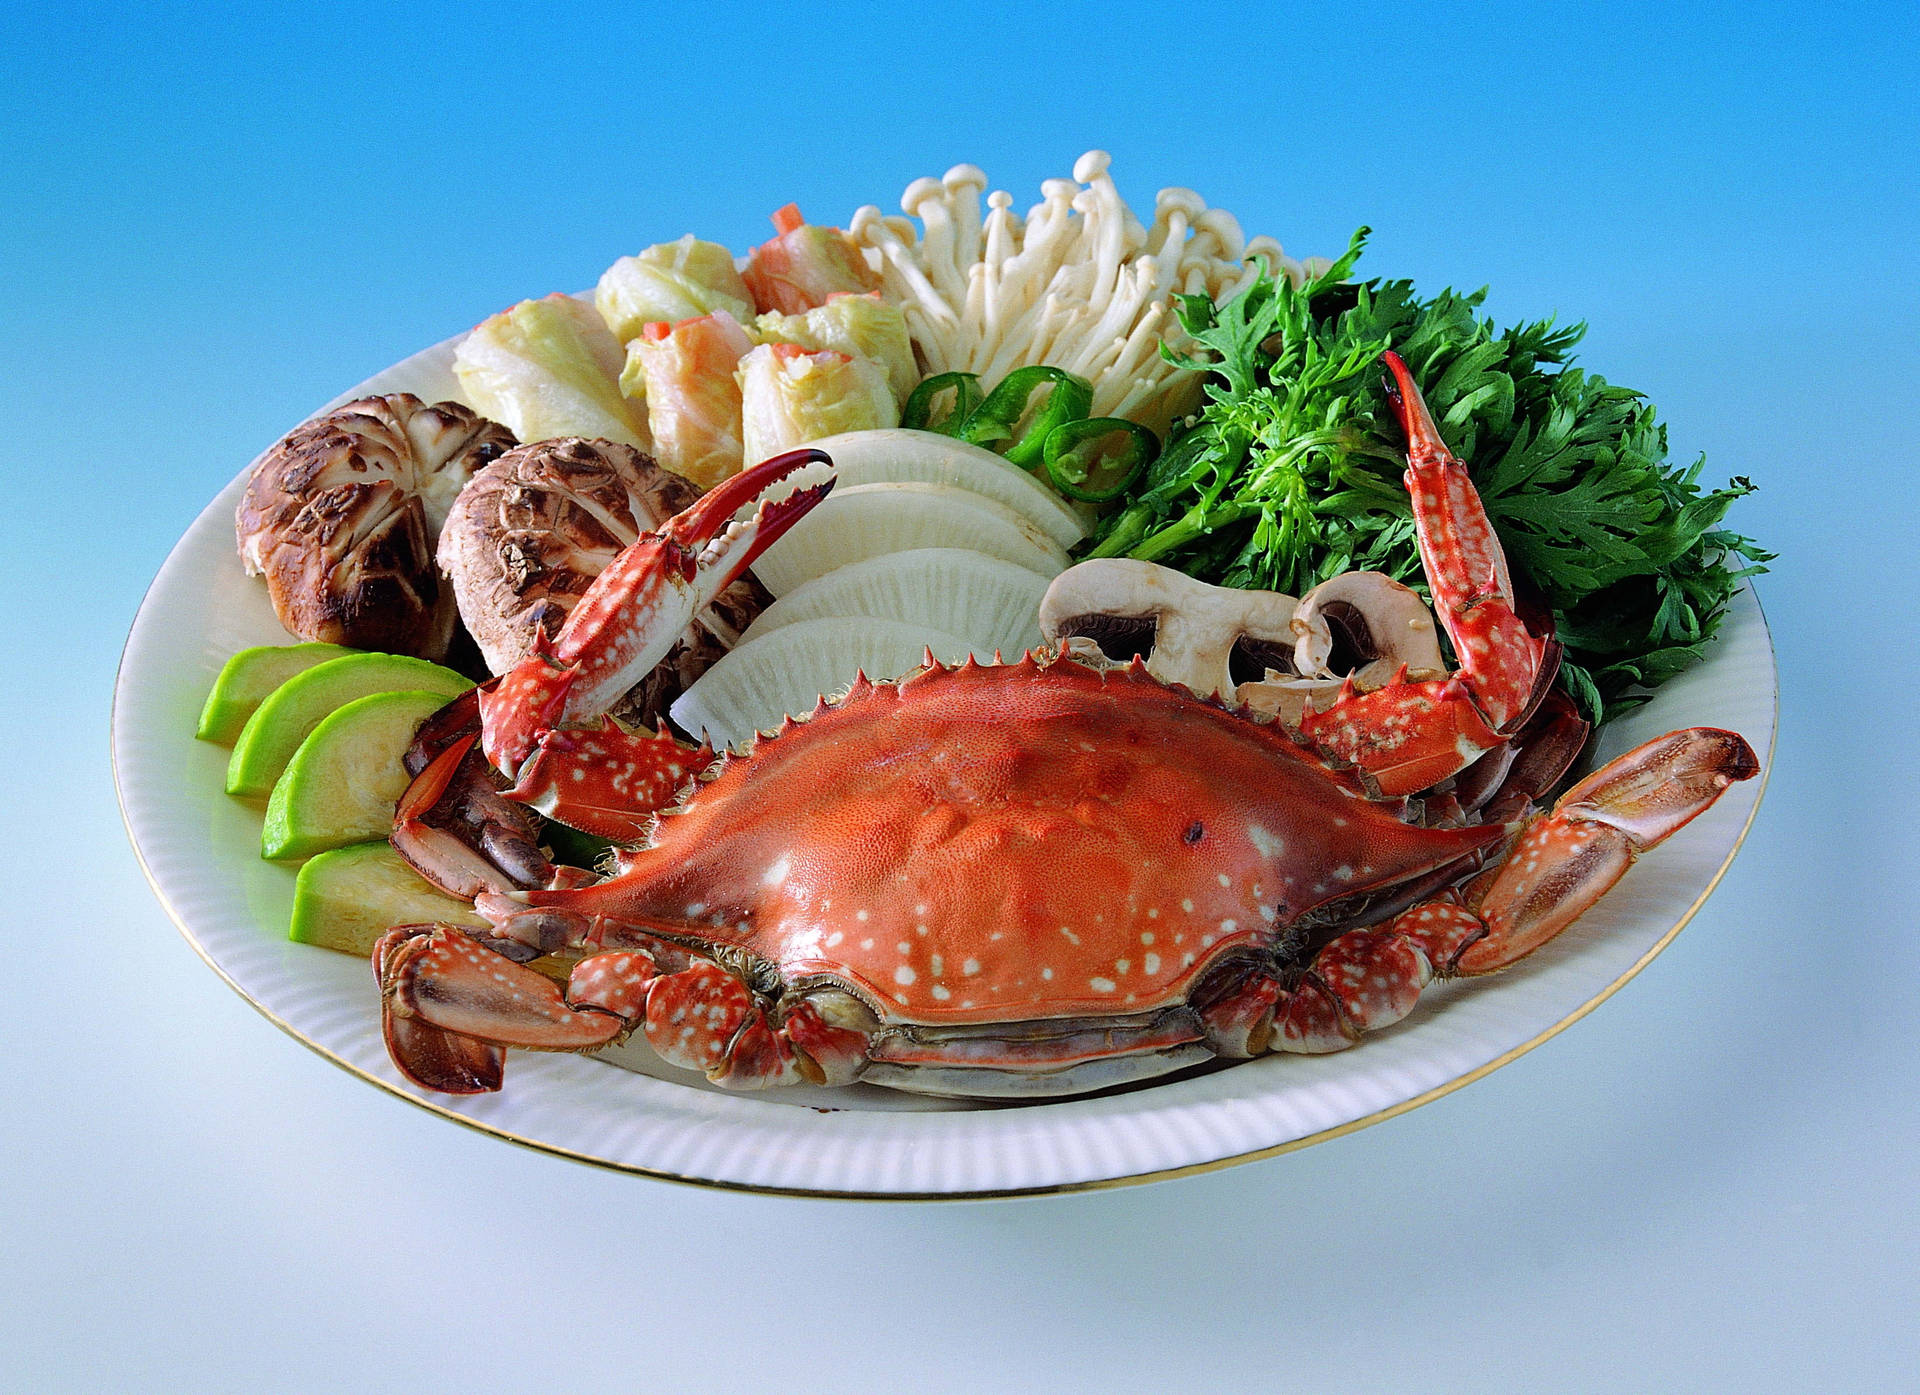 Crab In Plate With Vegetables